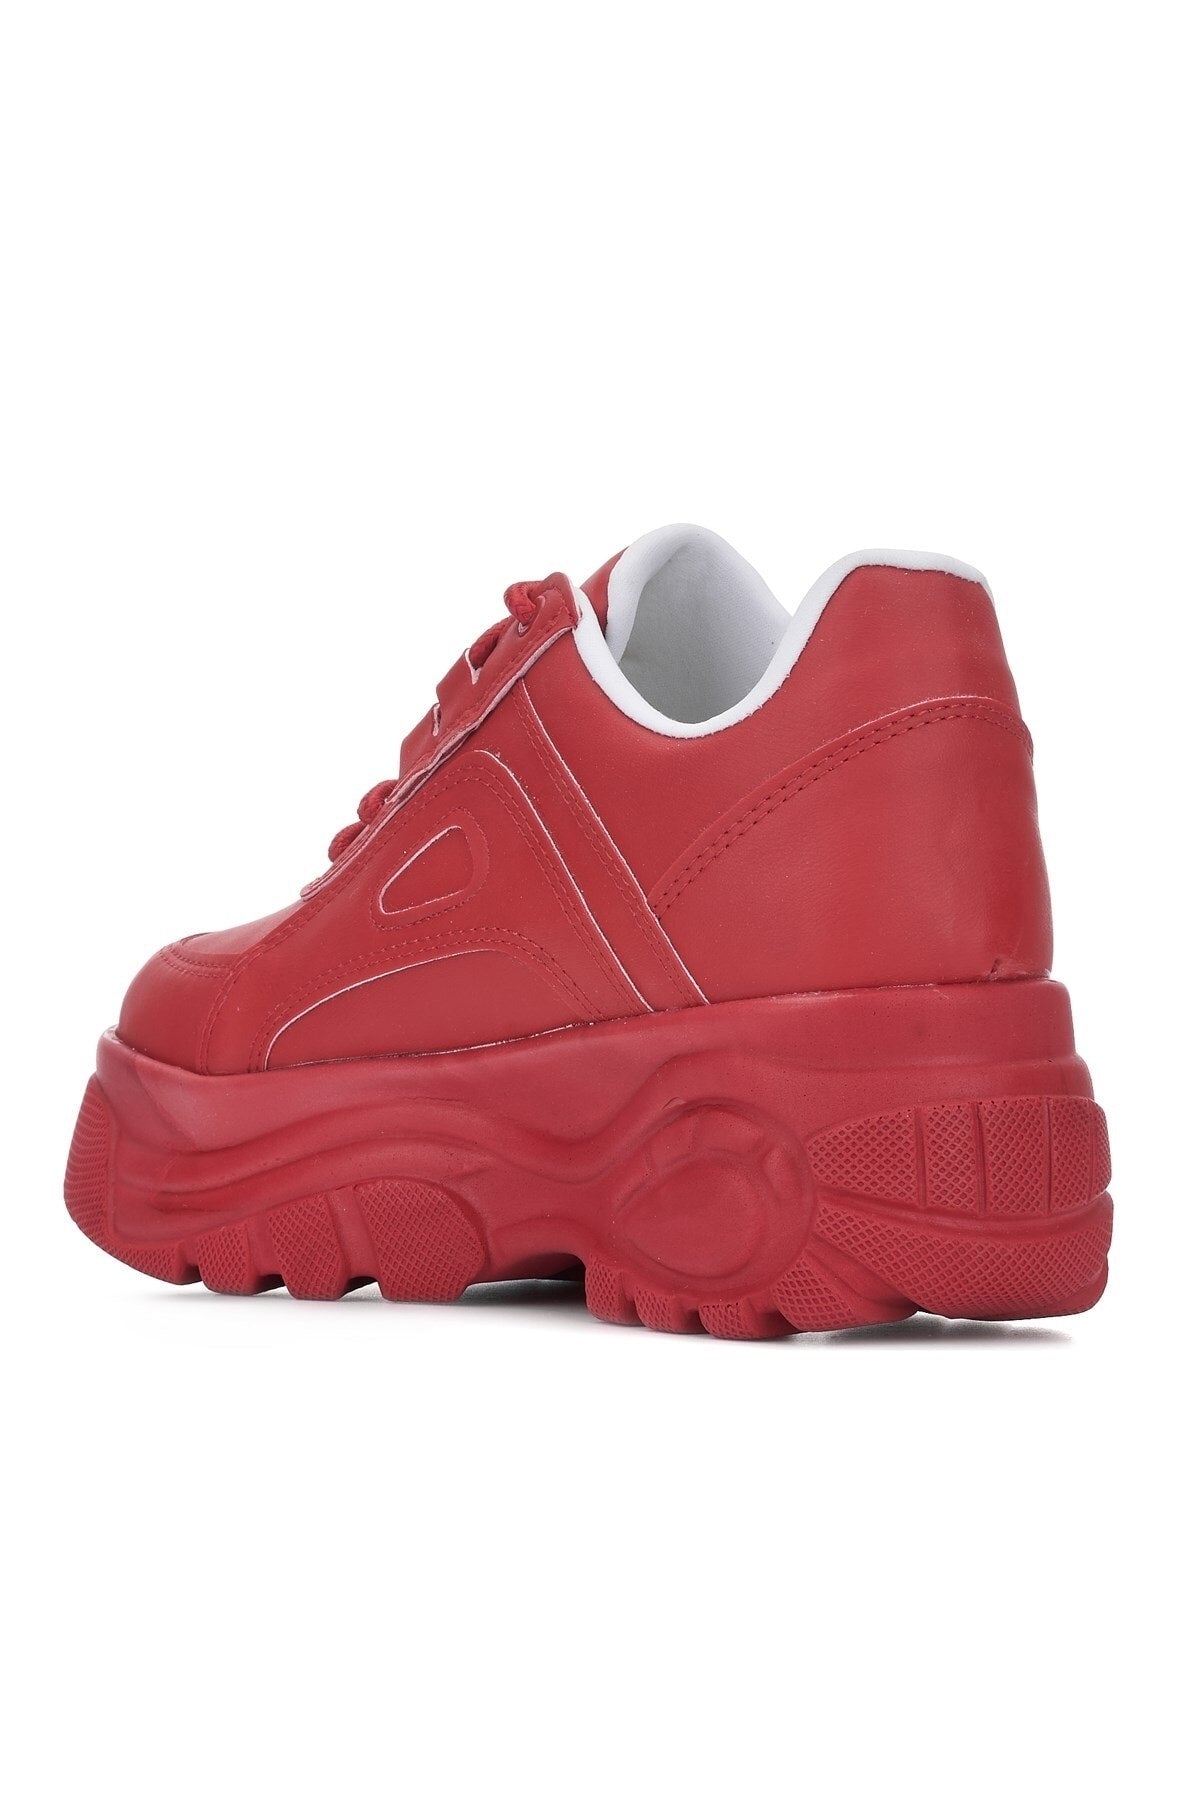 DAILY WOMEN RED SPORTS SHOES HIGH SPEED 6 CM CASHING LIGHT SMEaker 001